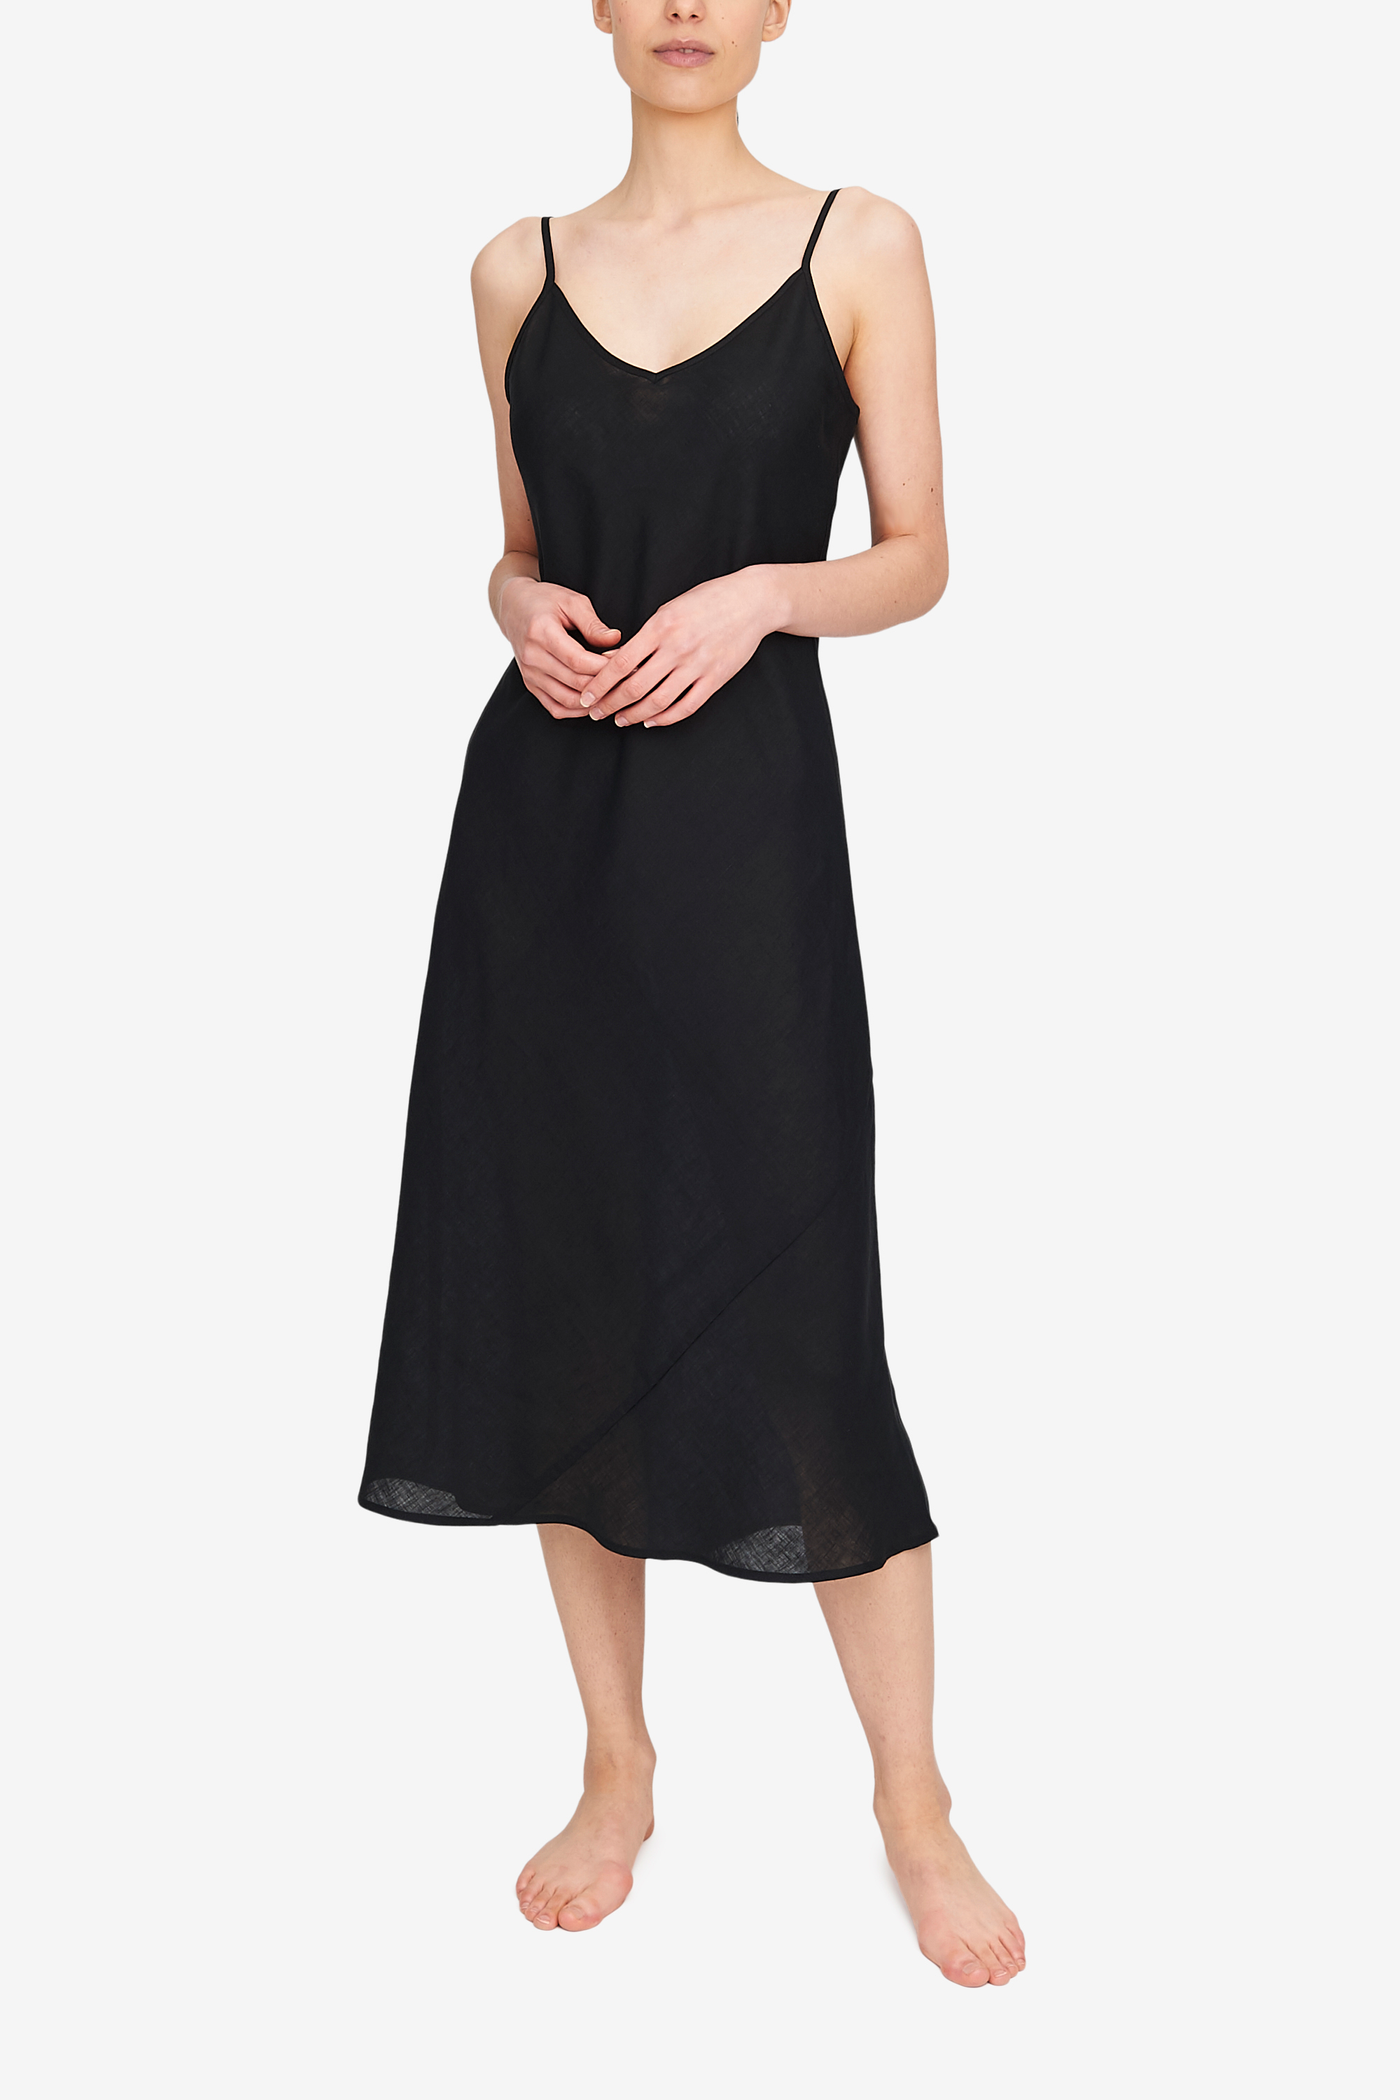 Midi length skip dress made in black linen. Adjustable spaghetti straps, v-neck, cut on the bias for the ultimate fit.